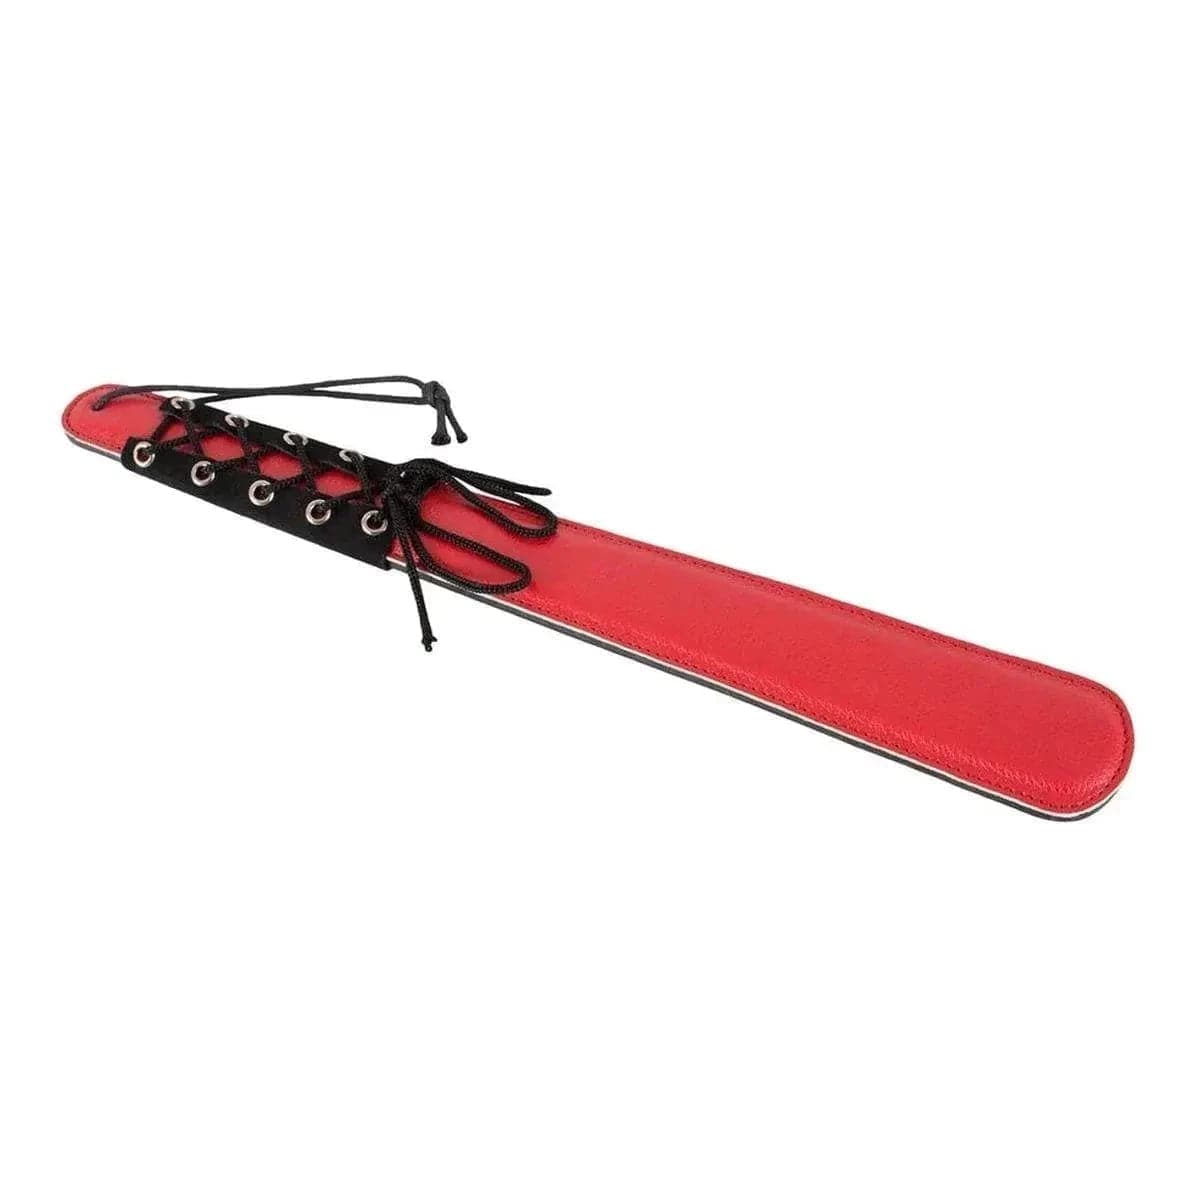 Paddle Red - Bad kitty, 42cm